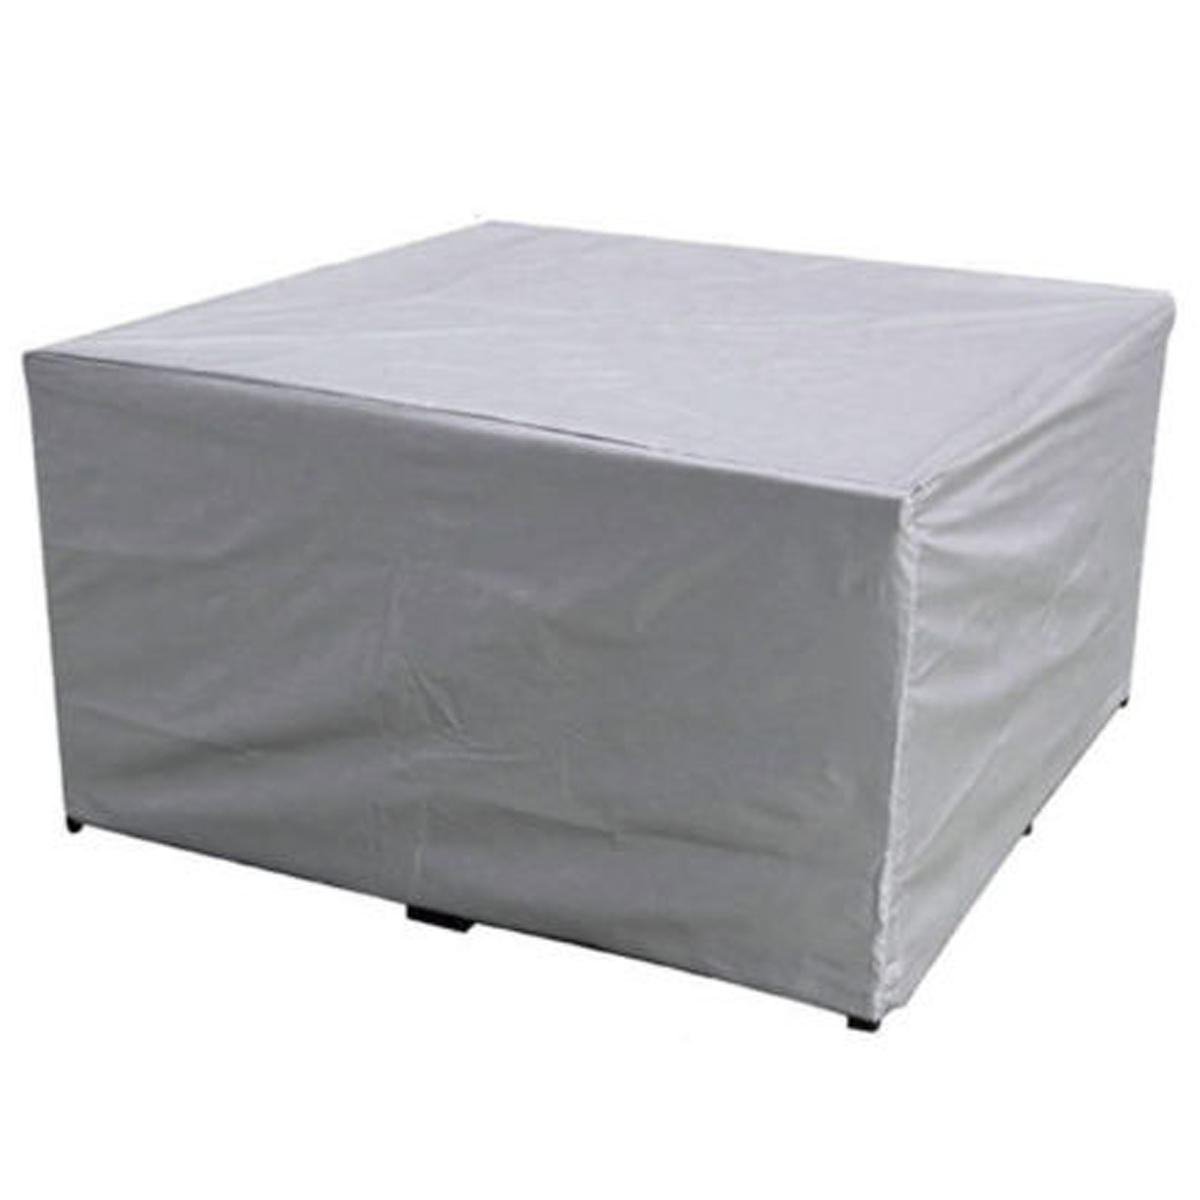 Multiple Size Outdoor Furniture Cover Sofa Chair Table Cover Rain Snow Dust Covers Waterproof Cover Gray